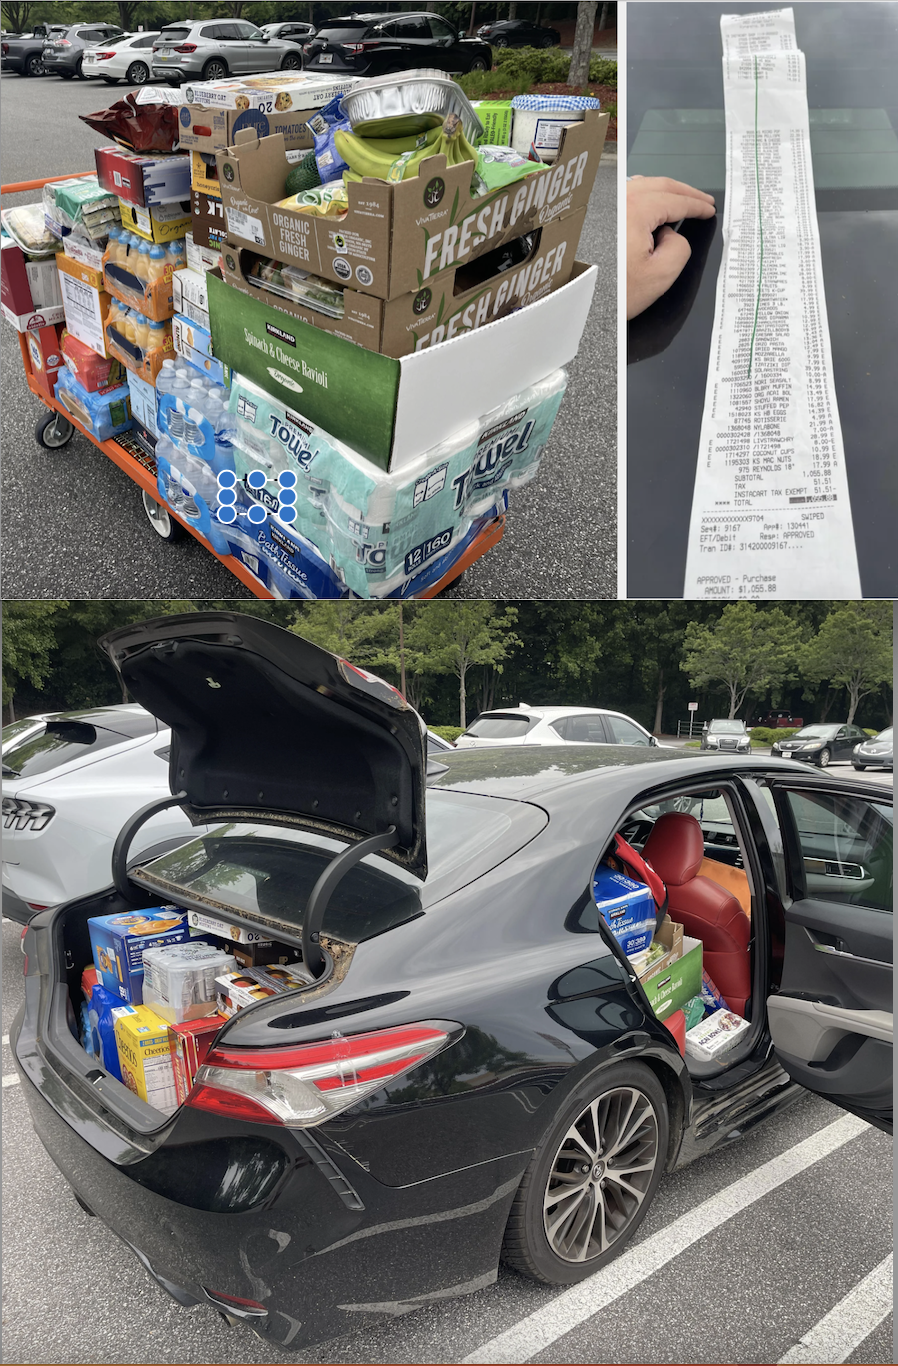 Photos of a large grocery haul along with their receipt for it